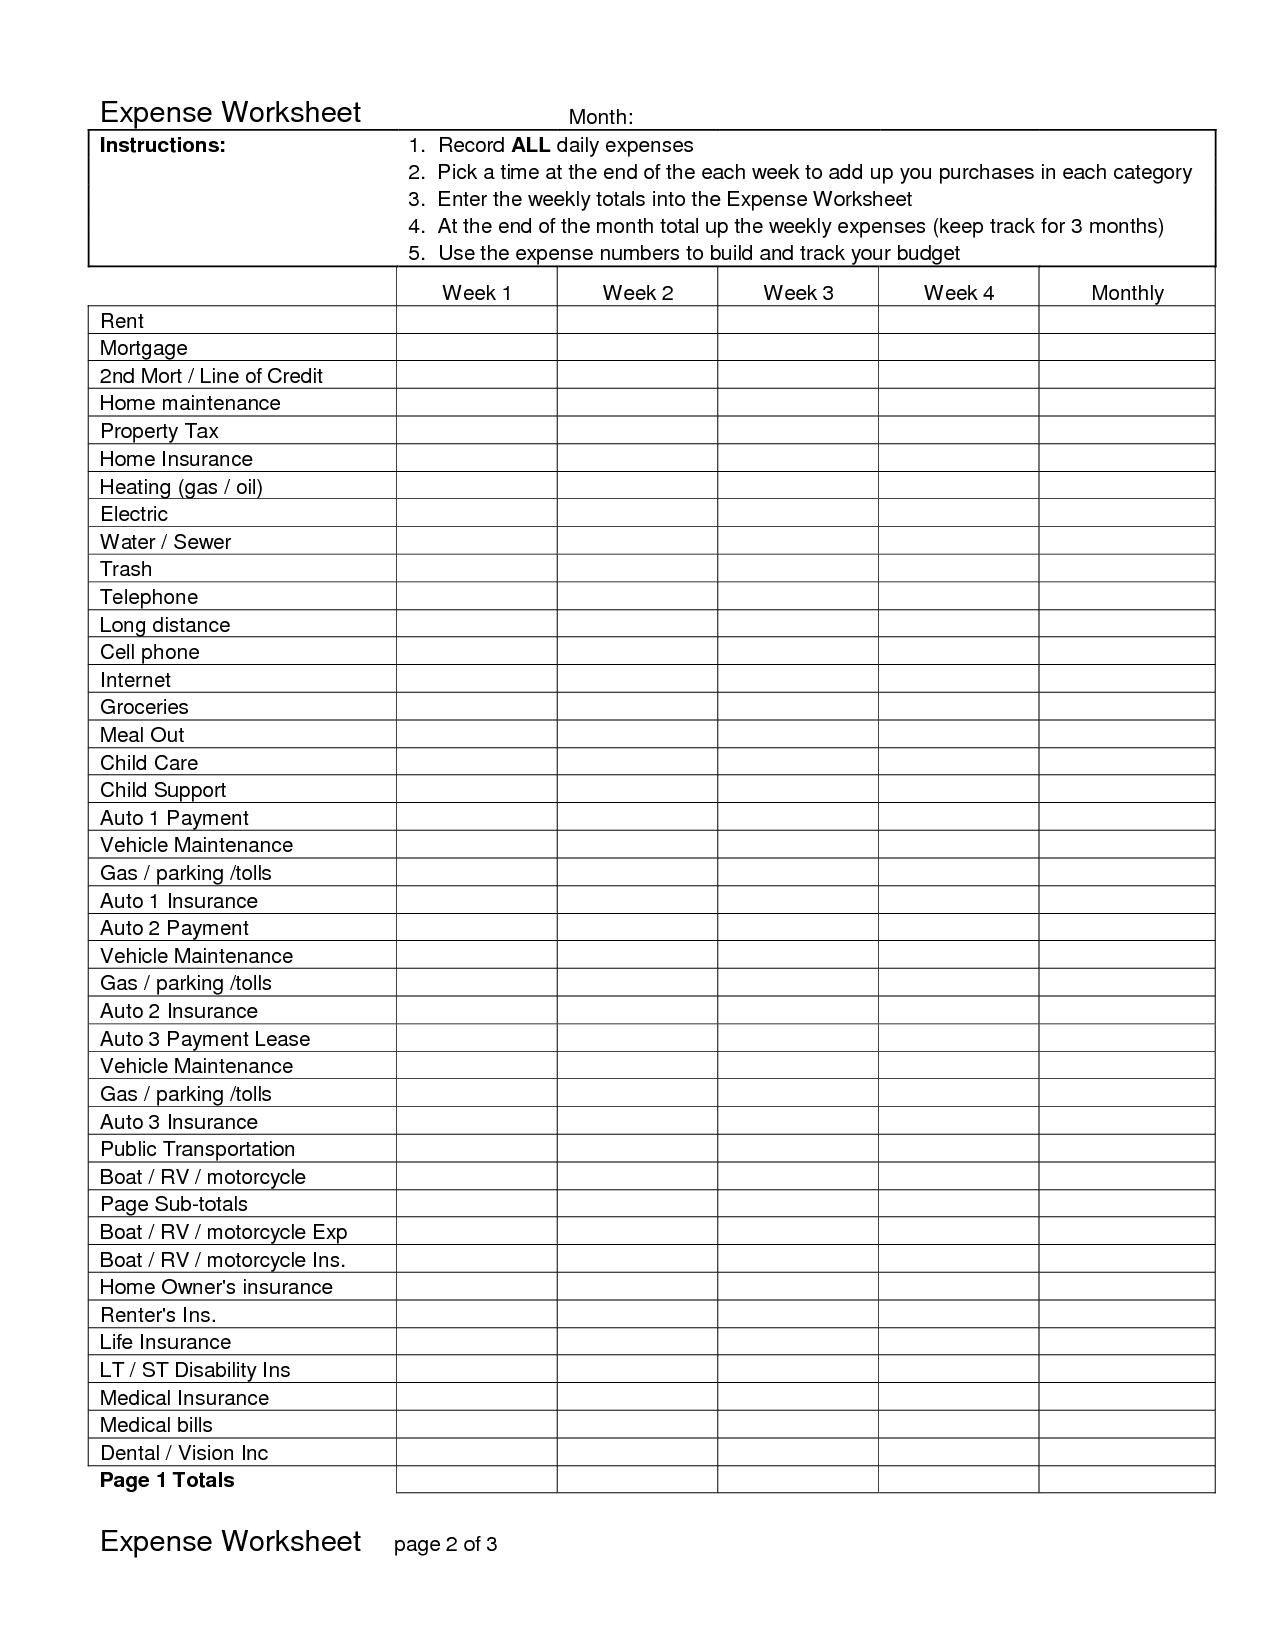 Blank Monthly Expense Worksheet